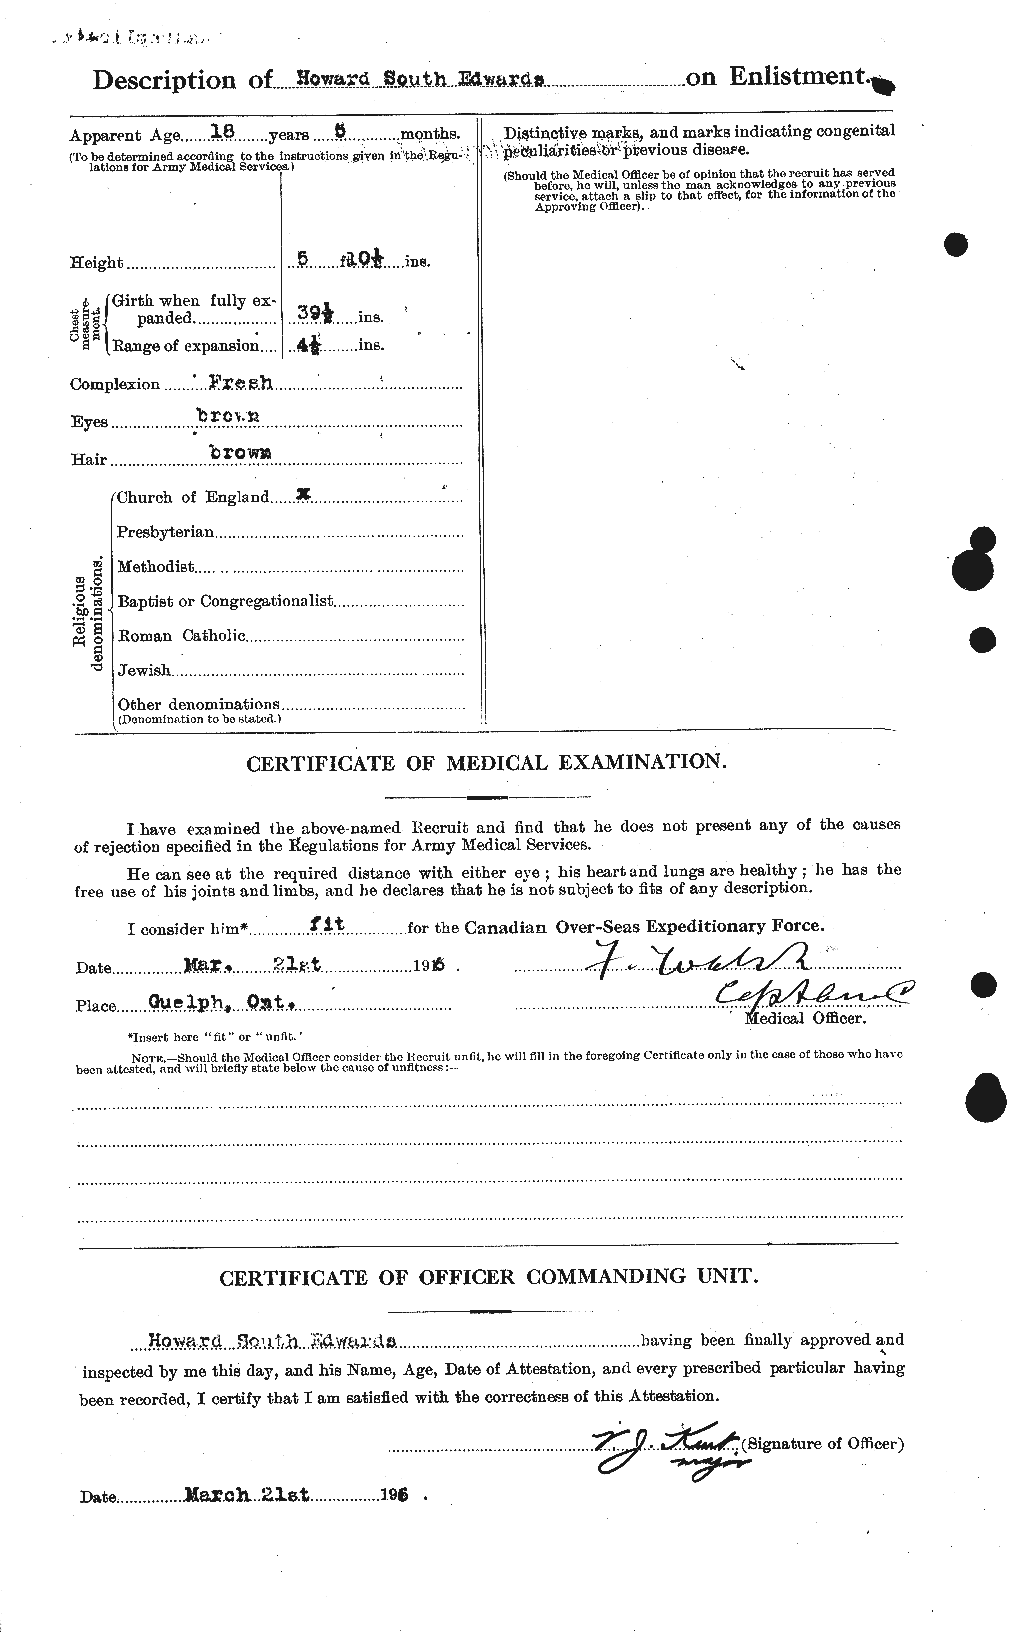 Personnel Records of the First World War - CEF 309791b